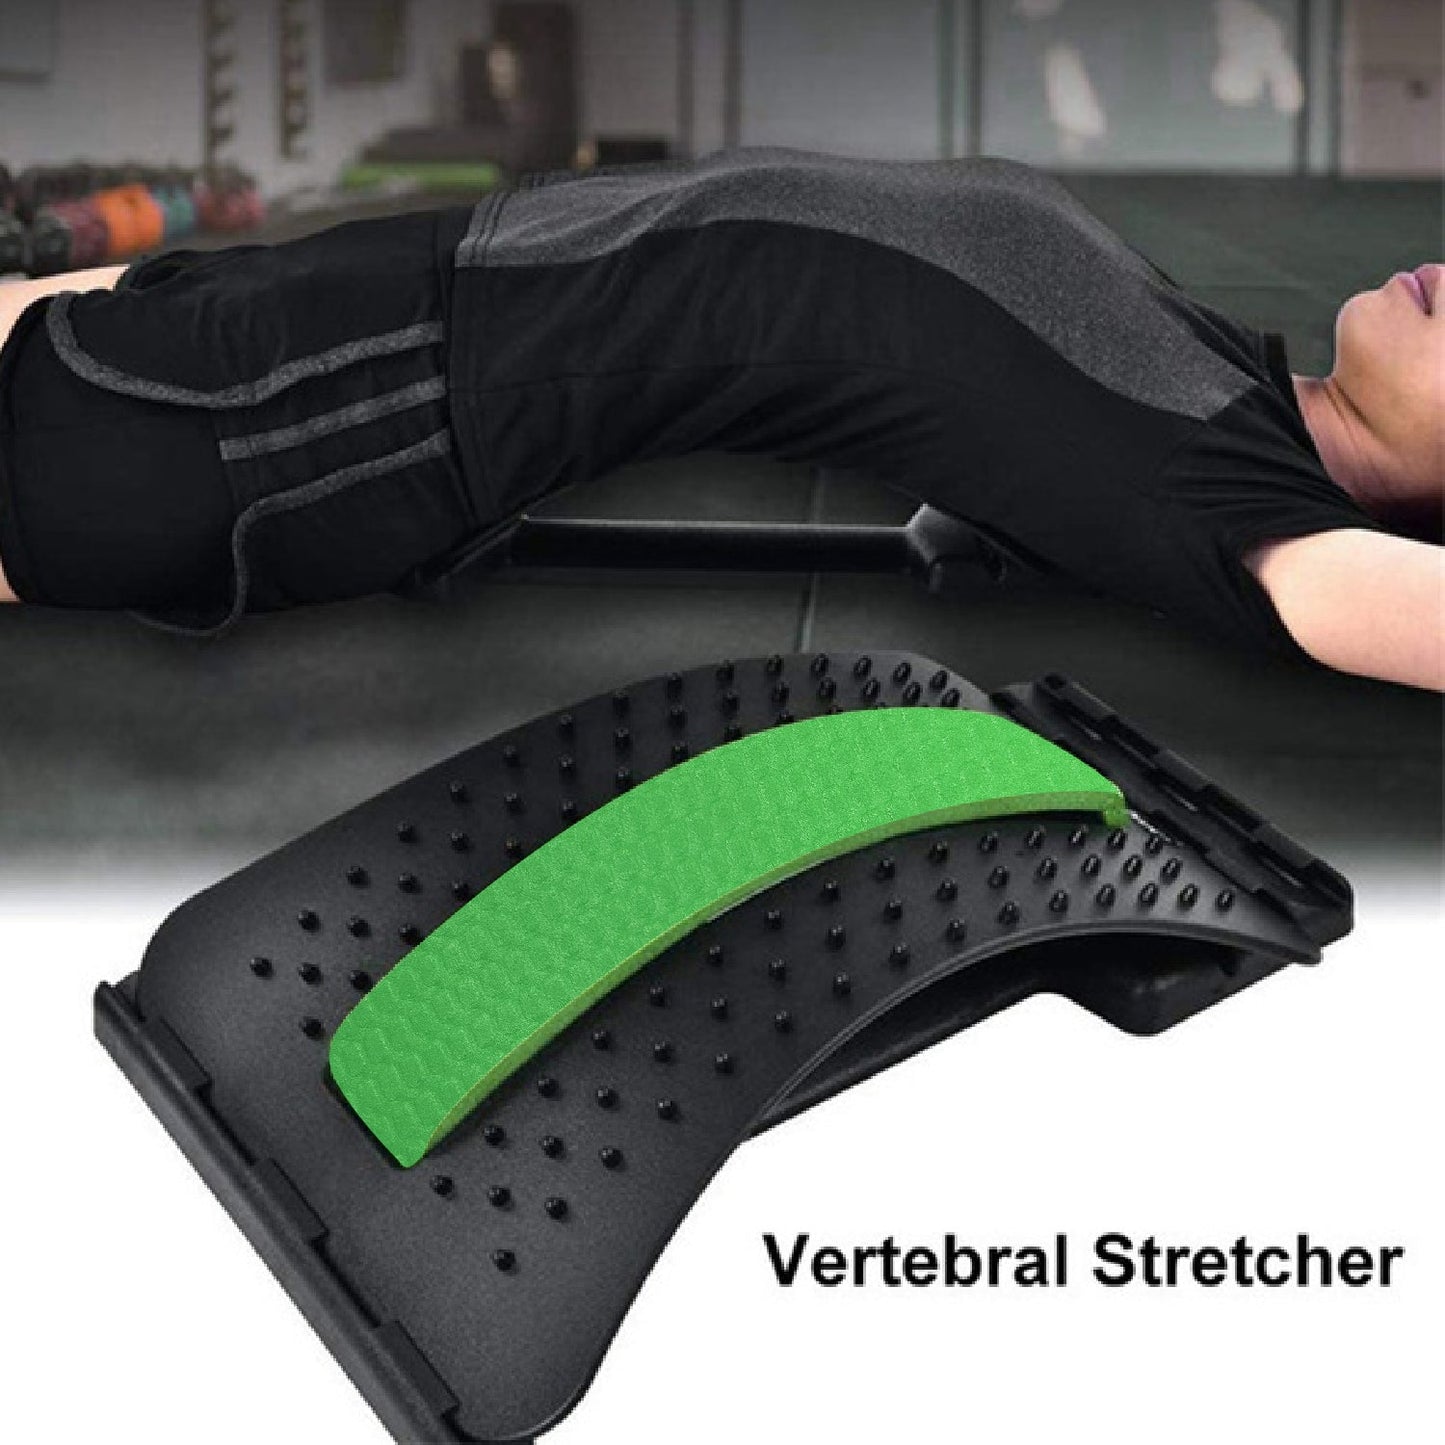 Multi-Level Back Stretcher Posture Corrector Device For Back Pain Relief